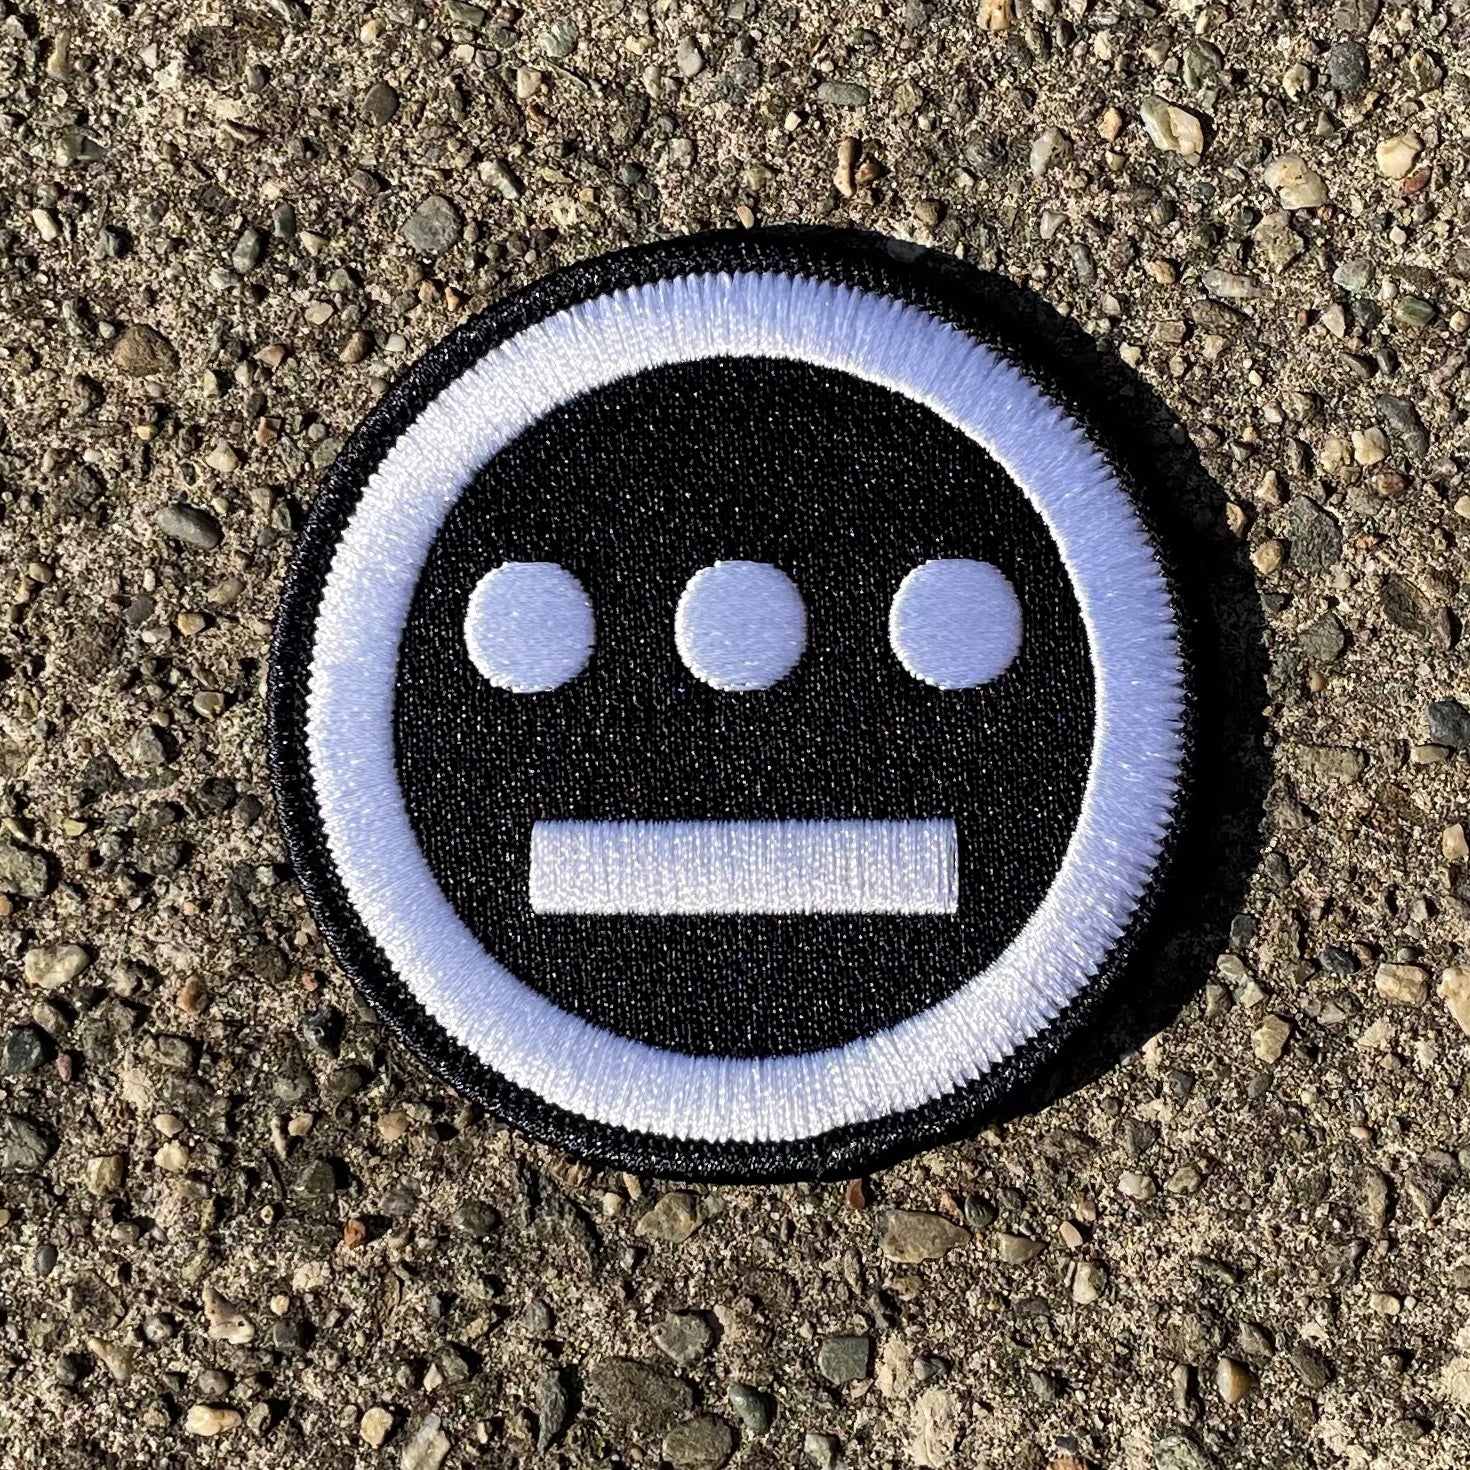  Embroidered patch with black and white Hieroglyphics logo on cement.